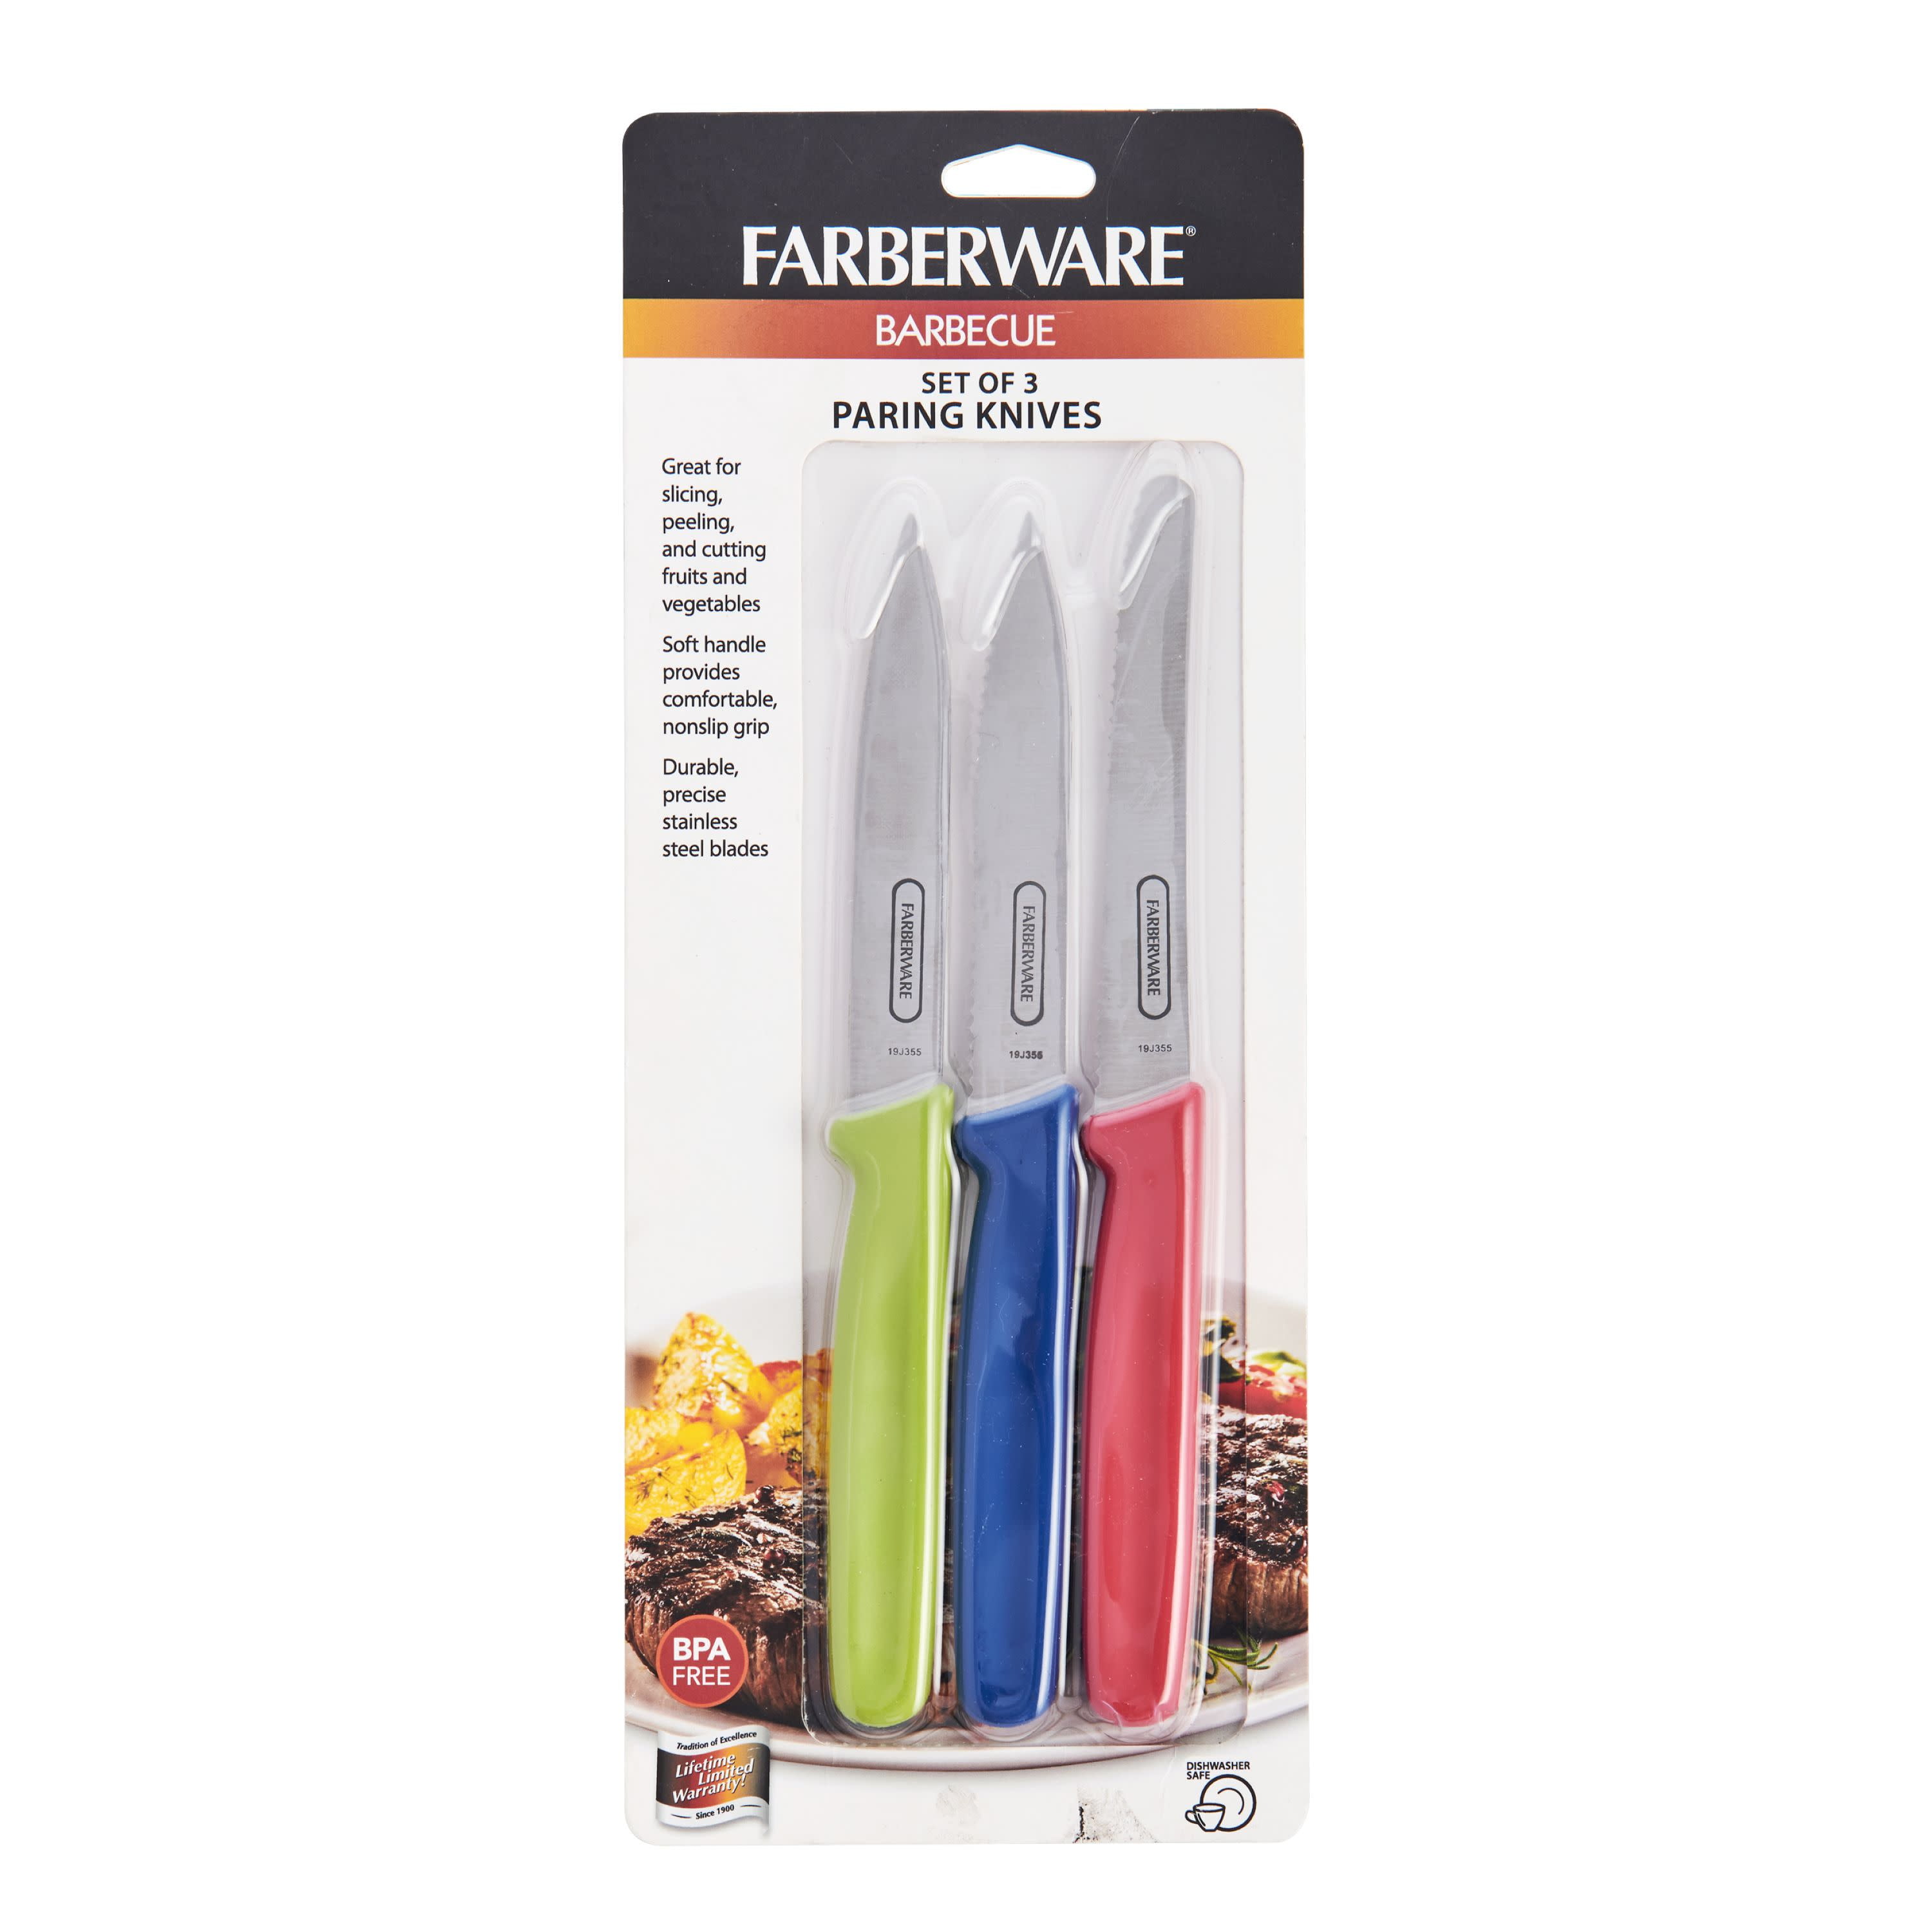 KOLORAE PARING KNIVES - COLORFUL AND FUN, SHARP CUTTING PARING KNIVES MAKE  FOR A GREAT GIFT FOR FRIENDS OR FAMILY (3 SETS OF 2) - AVAILABLE IN A SET